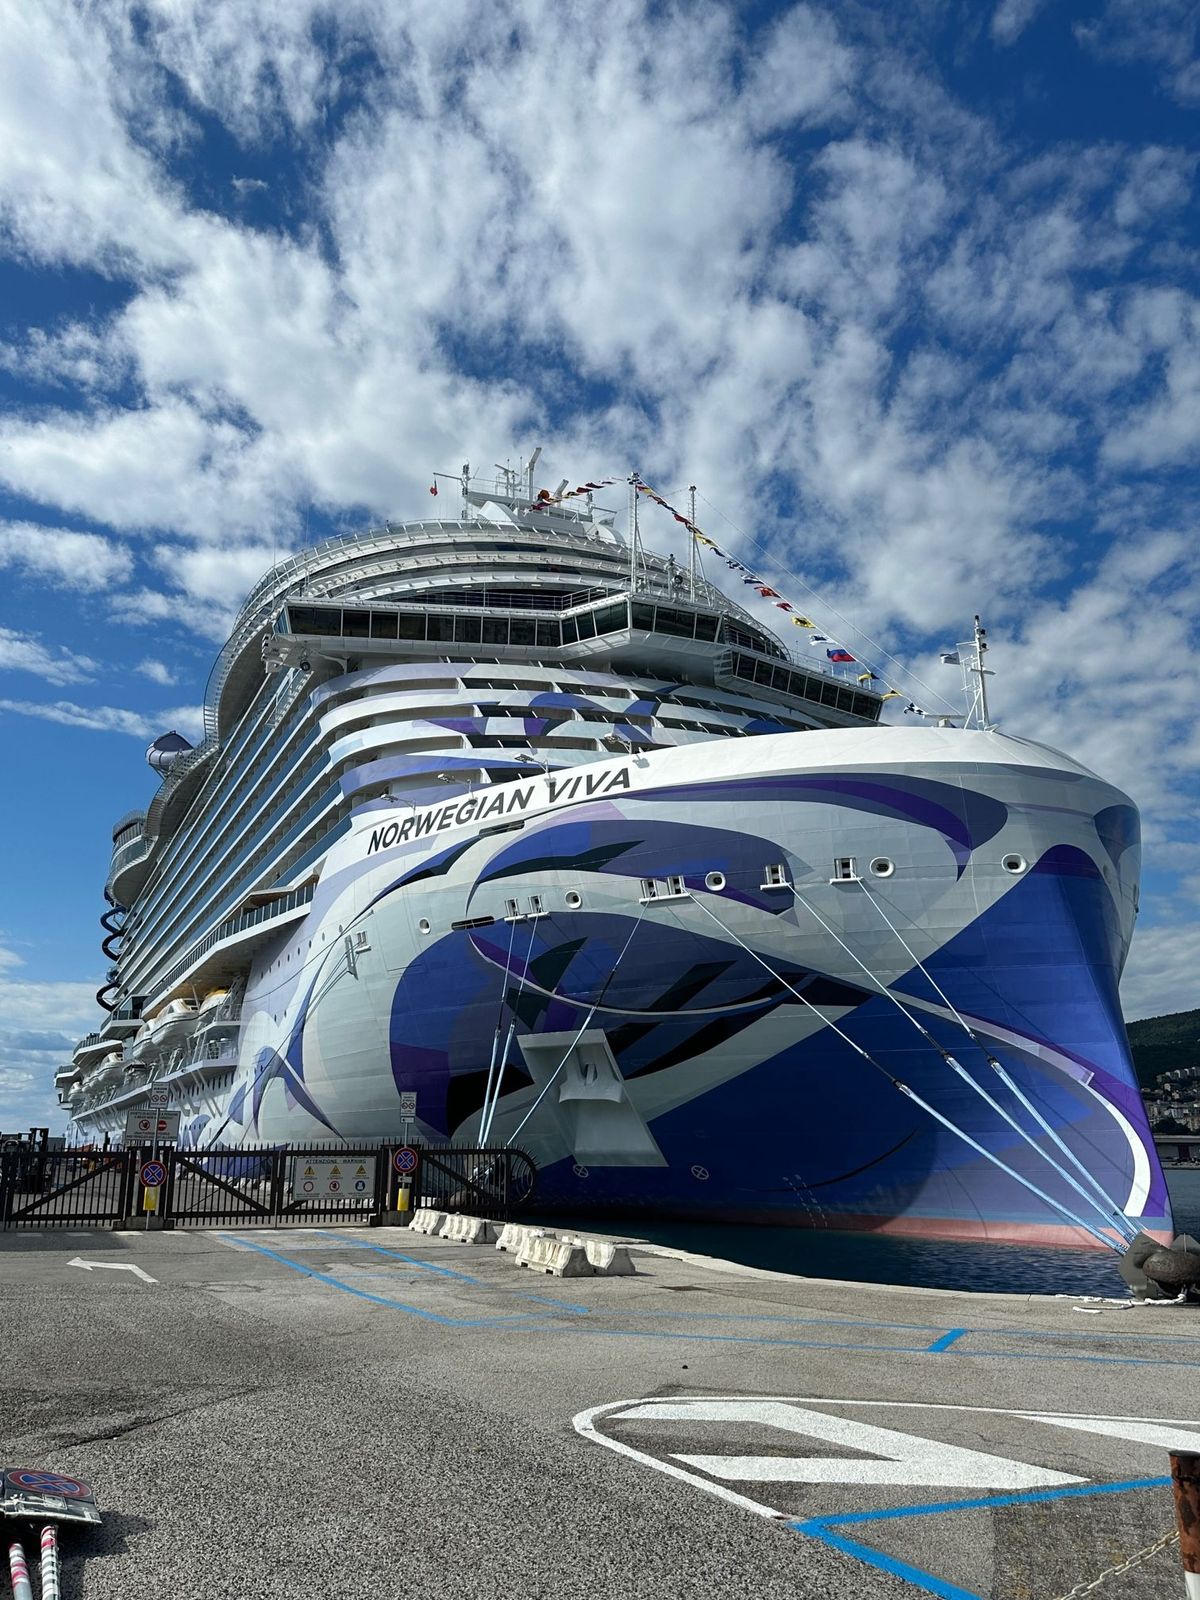 Long Live Viva: New NCL Ship Sets High Standard For Contemporary Cruise Travel